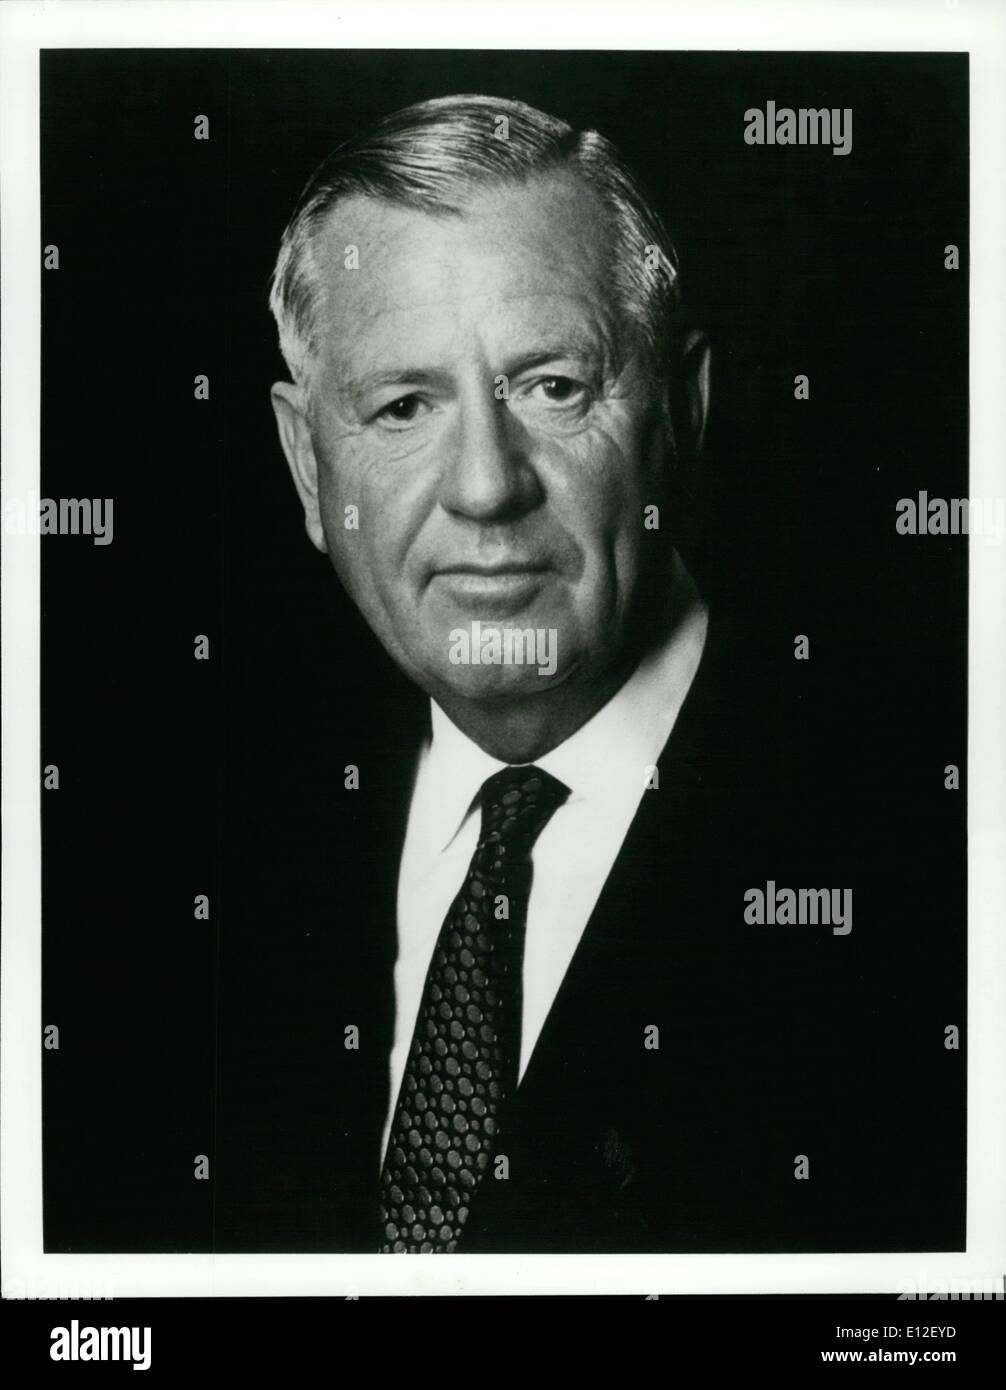 Dec. 21, 2011 - Victor HasselBlad August 5, 1978 - Instuctor of the Habelled Comedy of System s Stock Photo